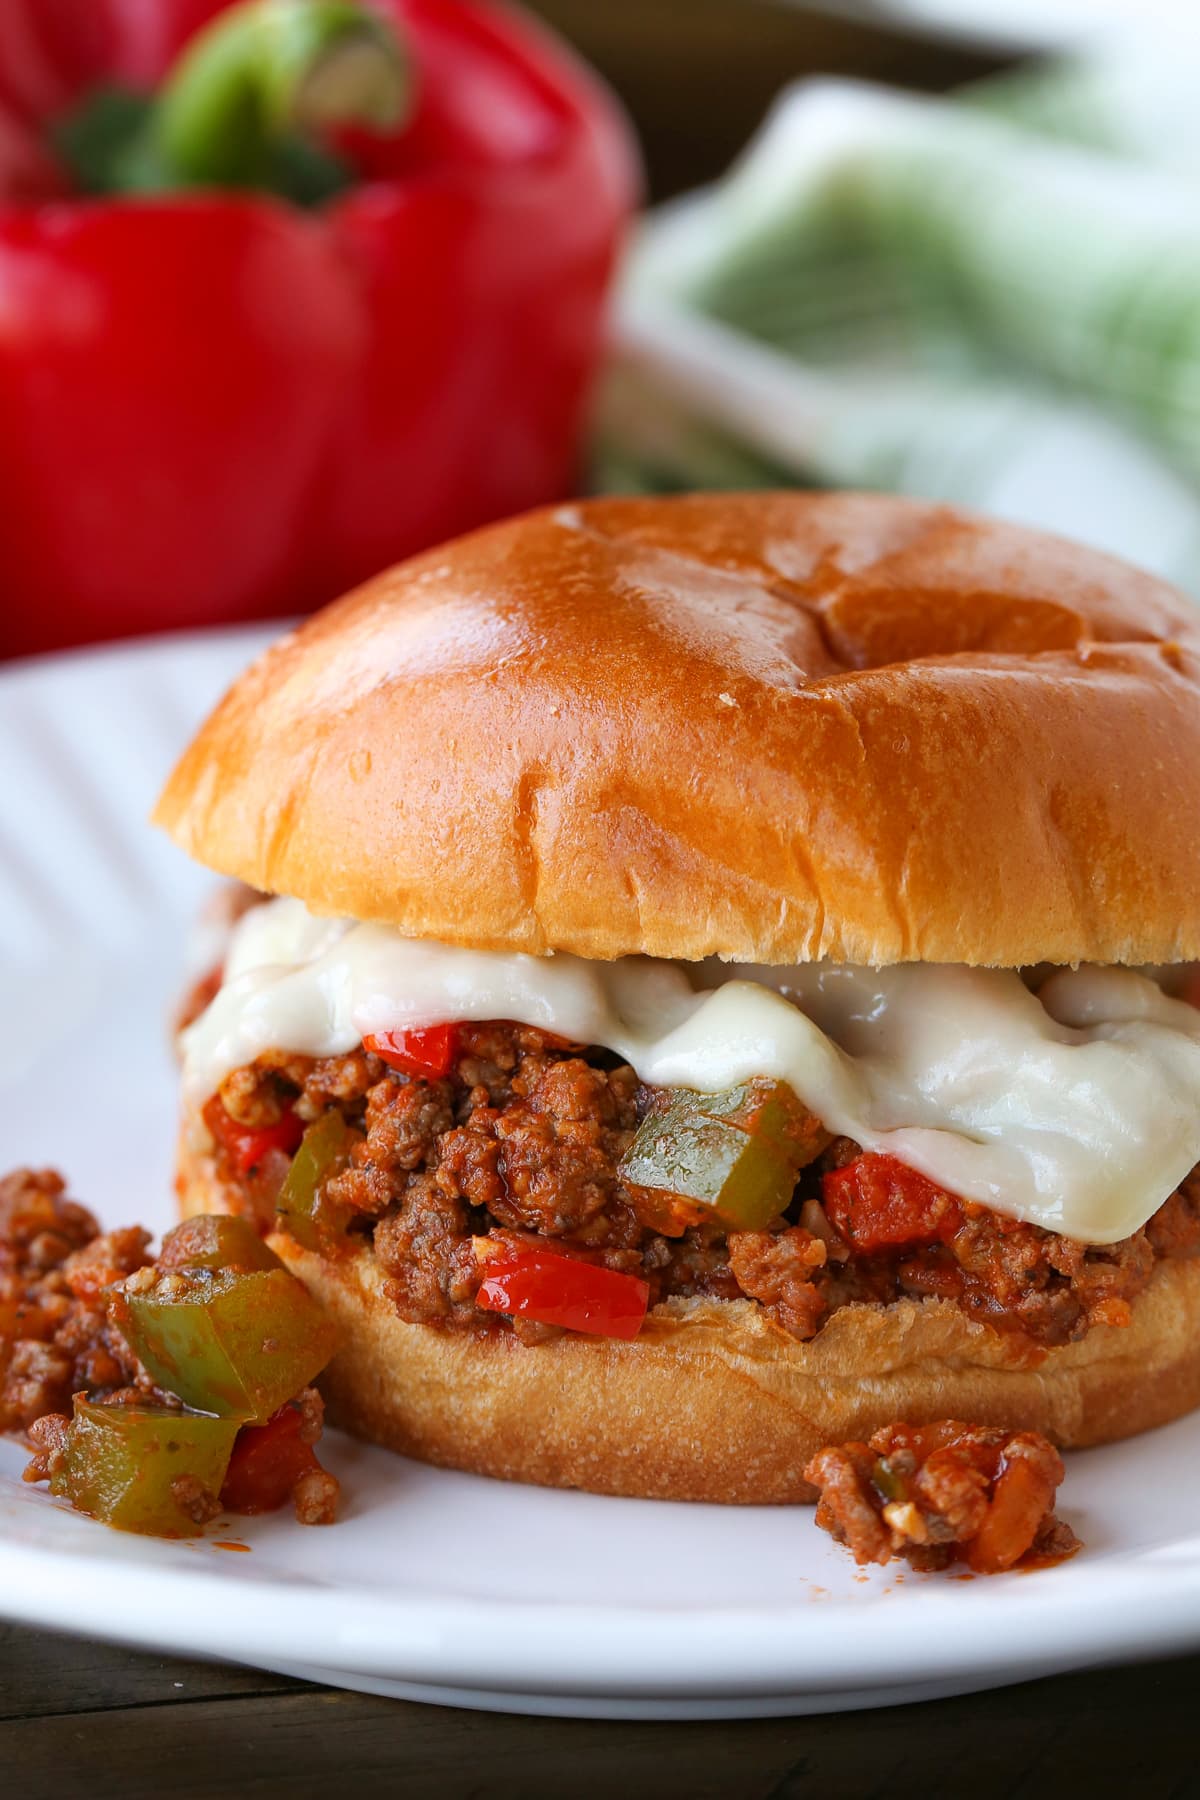 sloppy joe sandwich with cheese on white plate